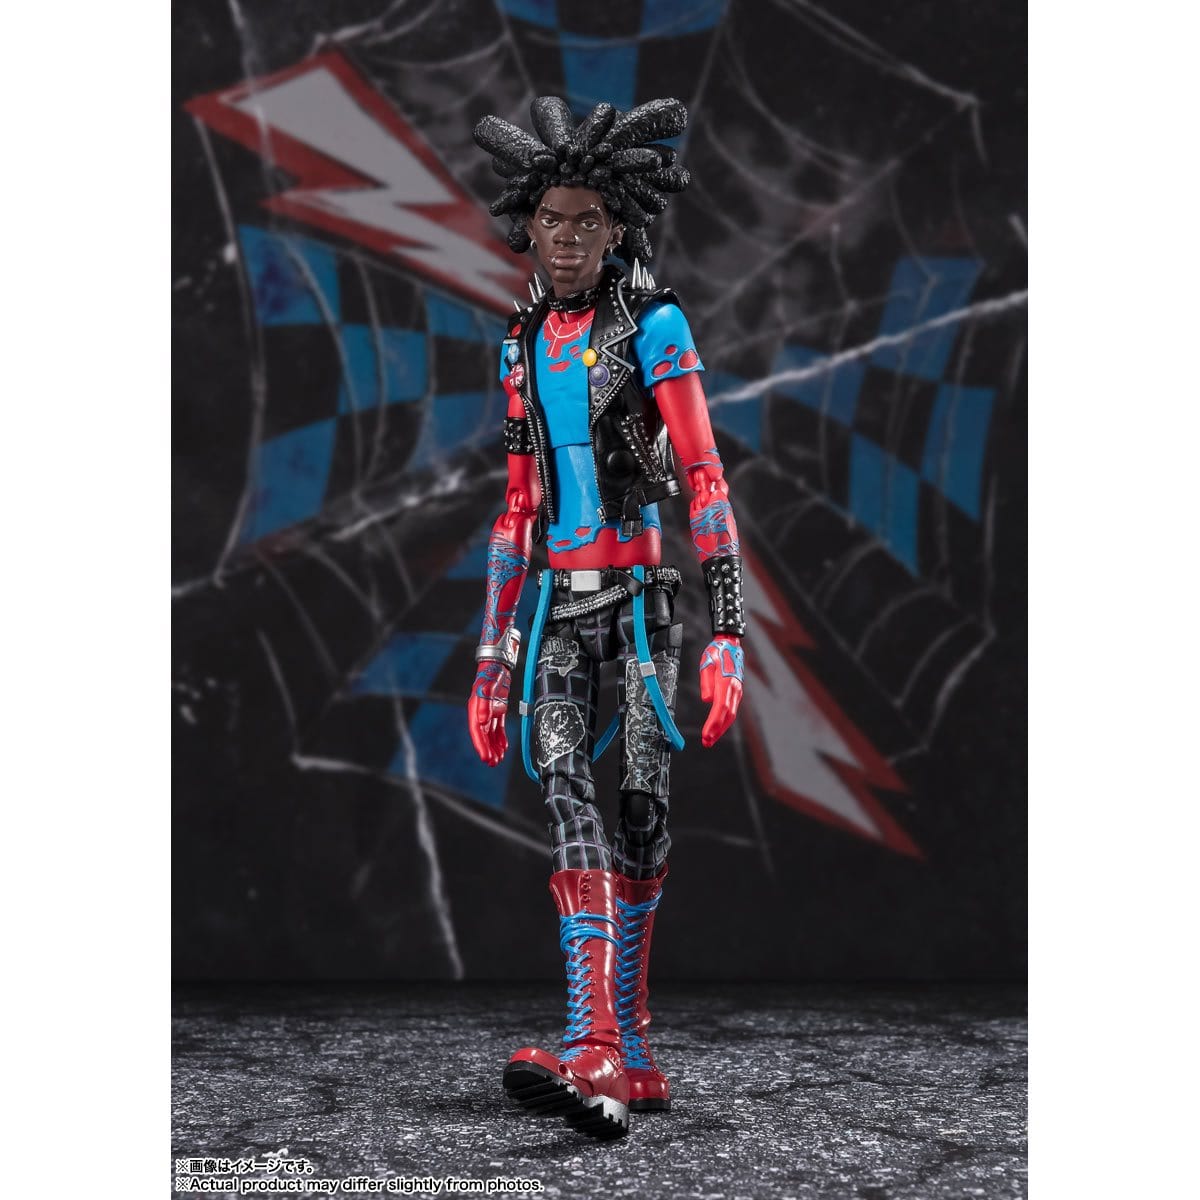  A LOOK AT: S.H. Figuarts Spider-Man Across the Spider-Punk